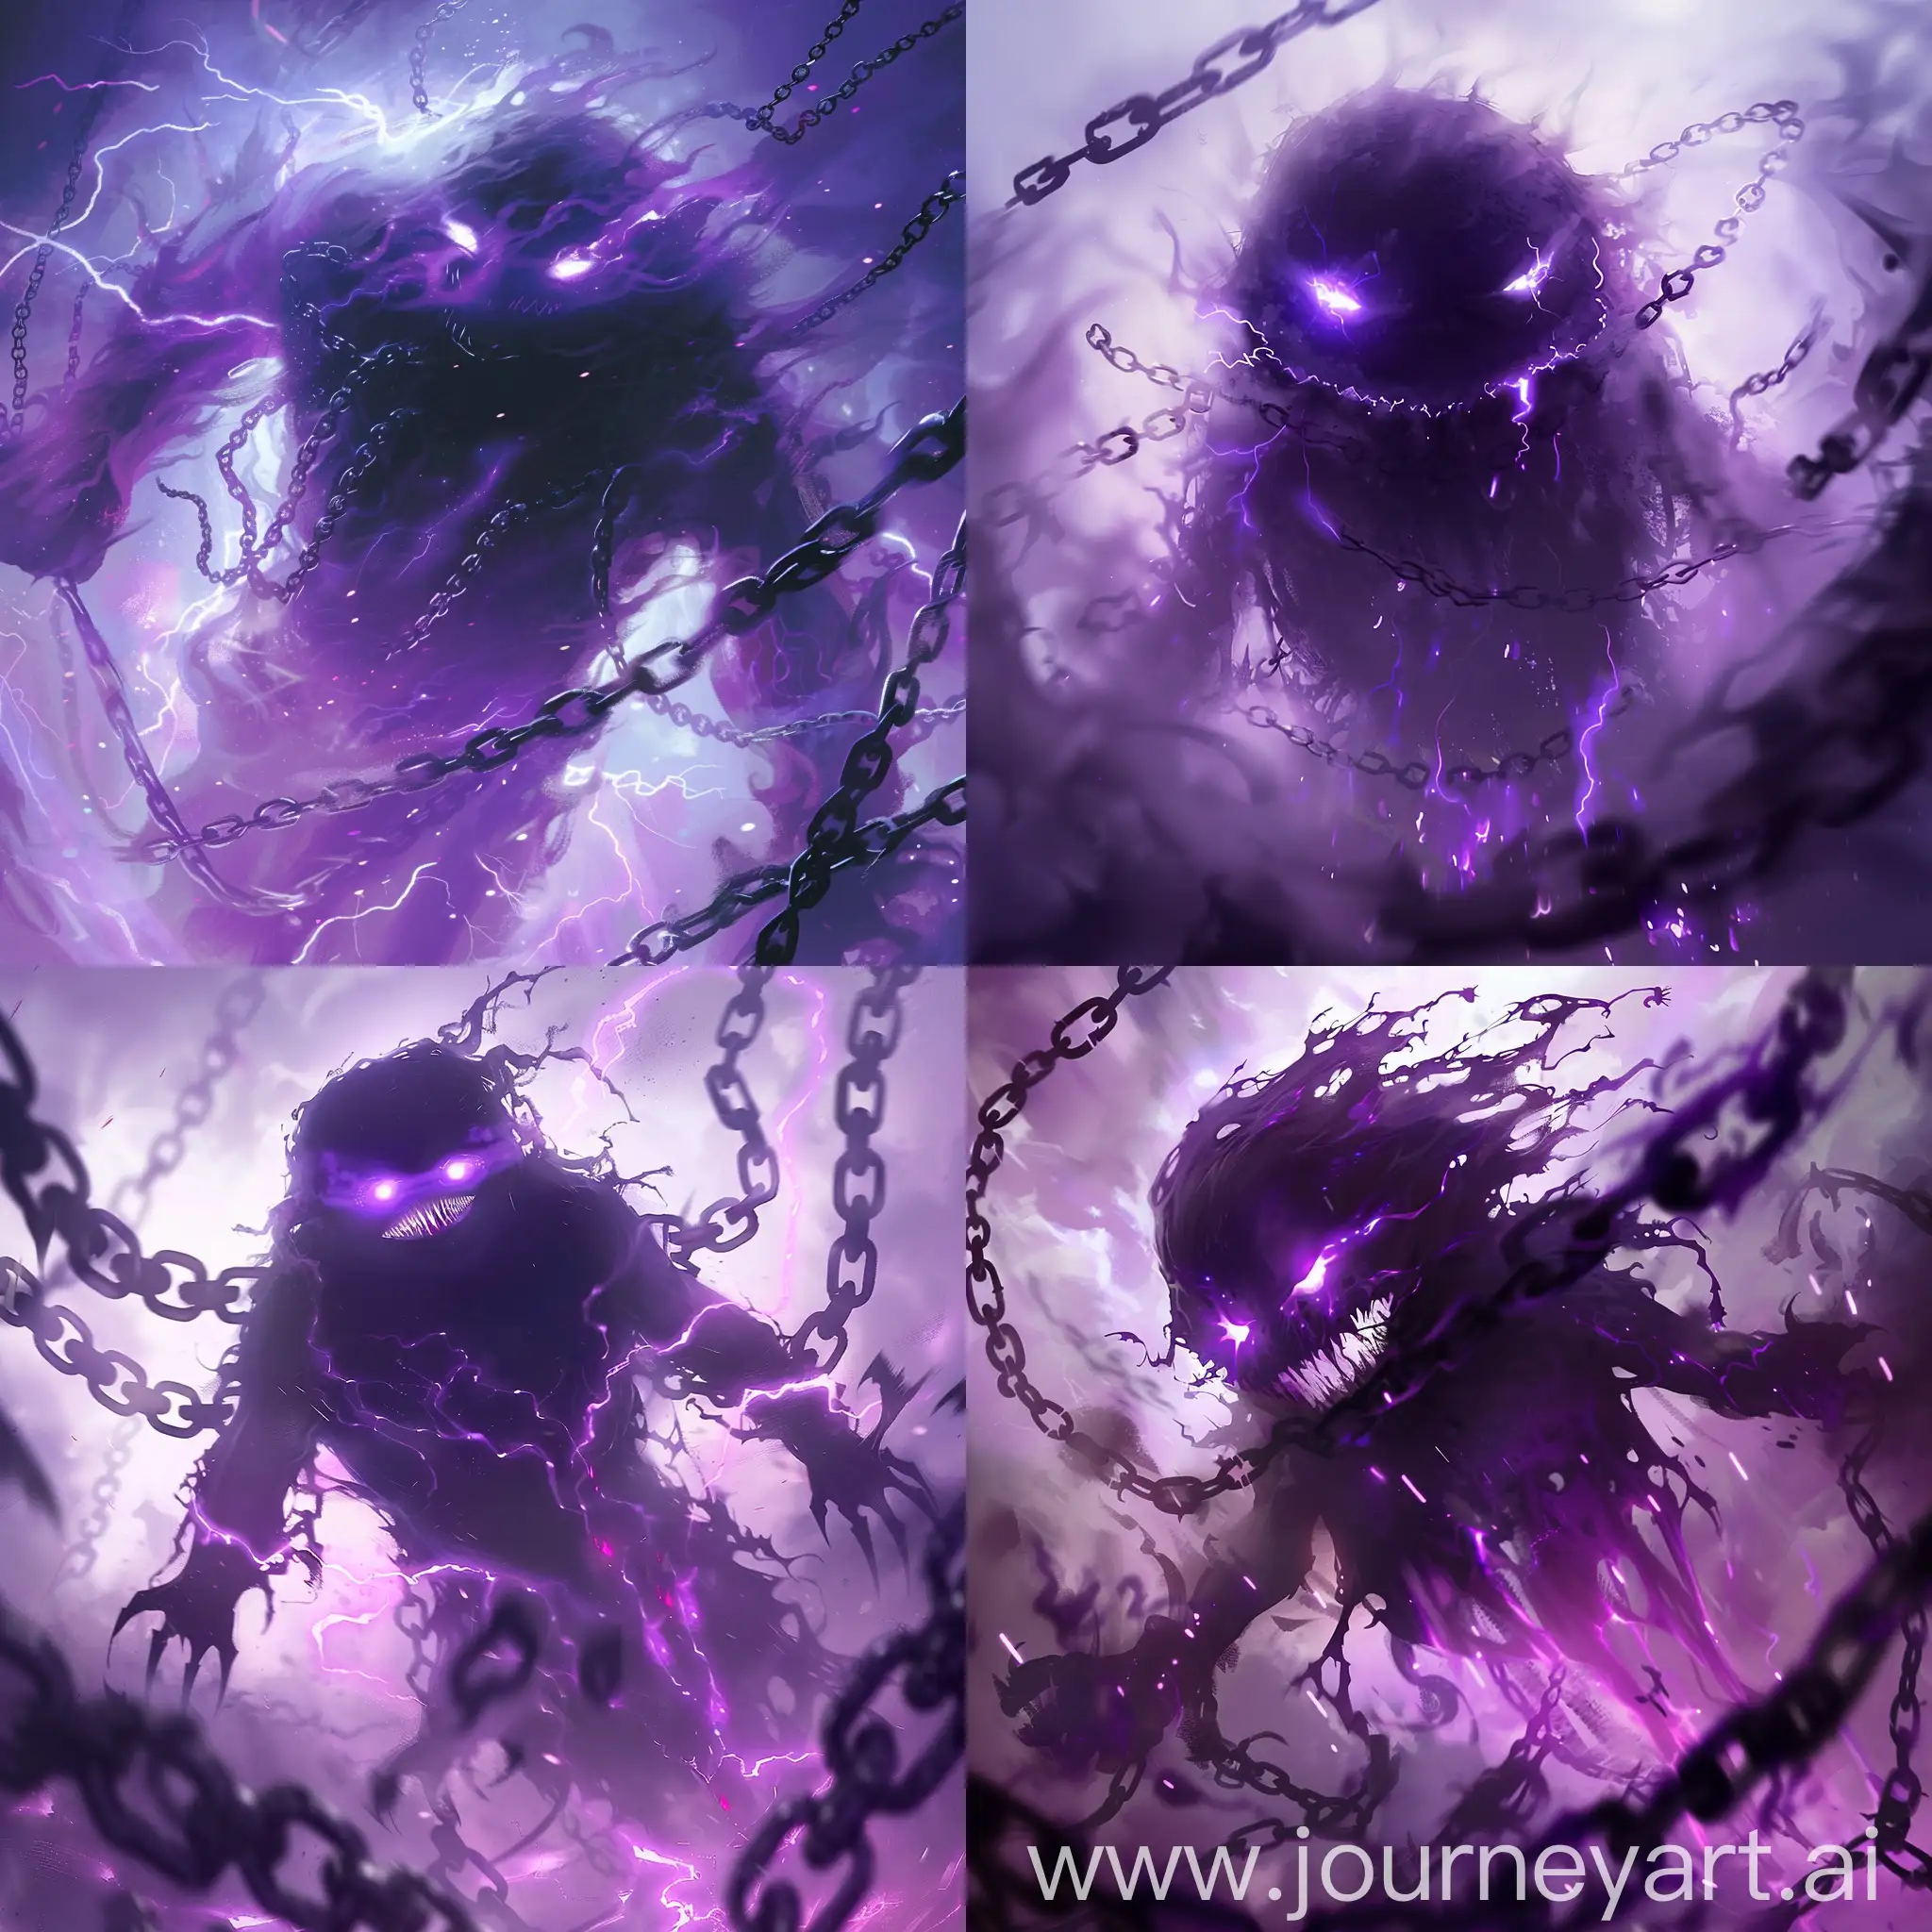 a shadow monster with purple eyes, rage eyes, without mouth, chains flying around it, everything glows with purple smoke and light